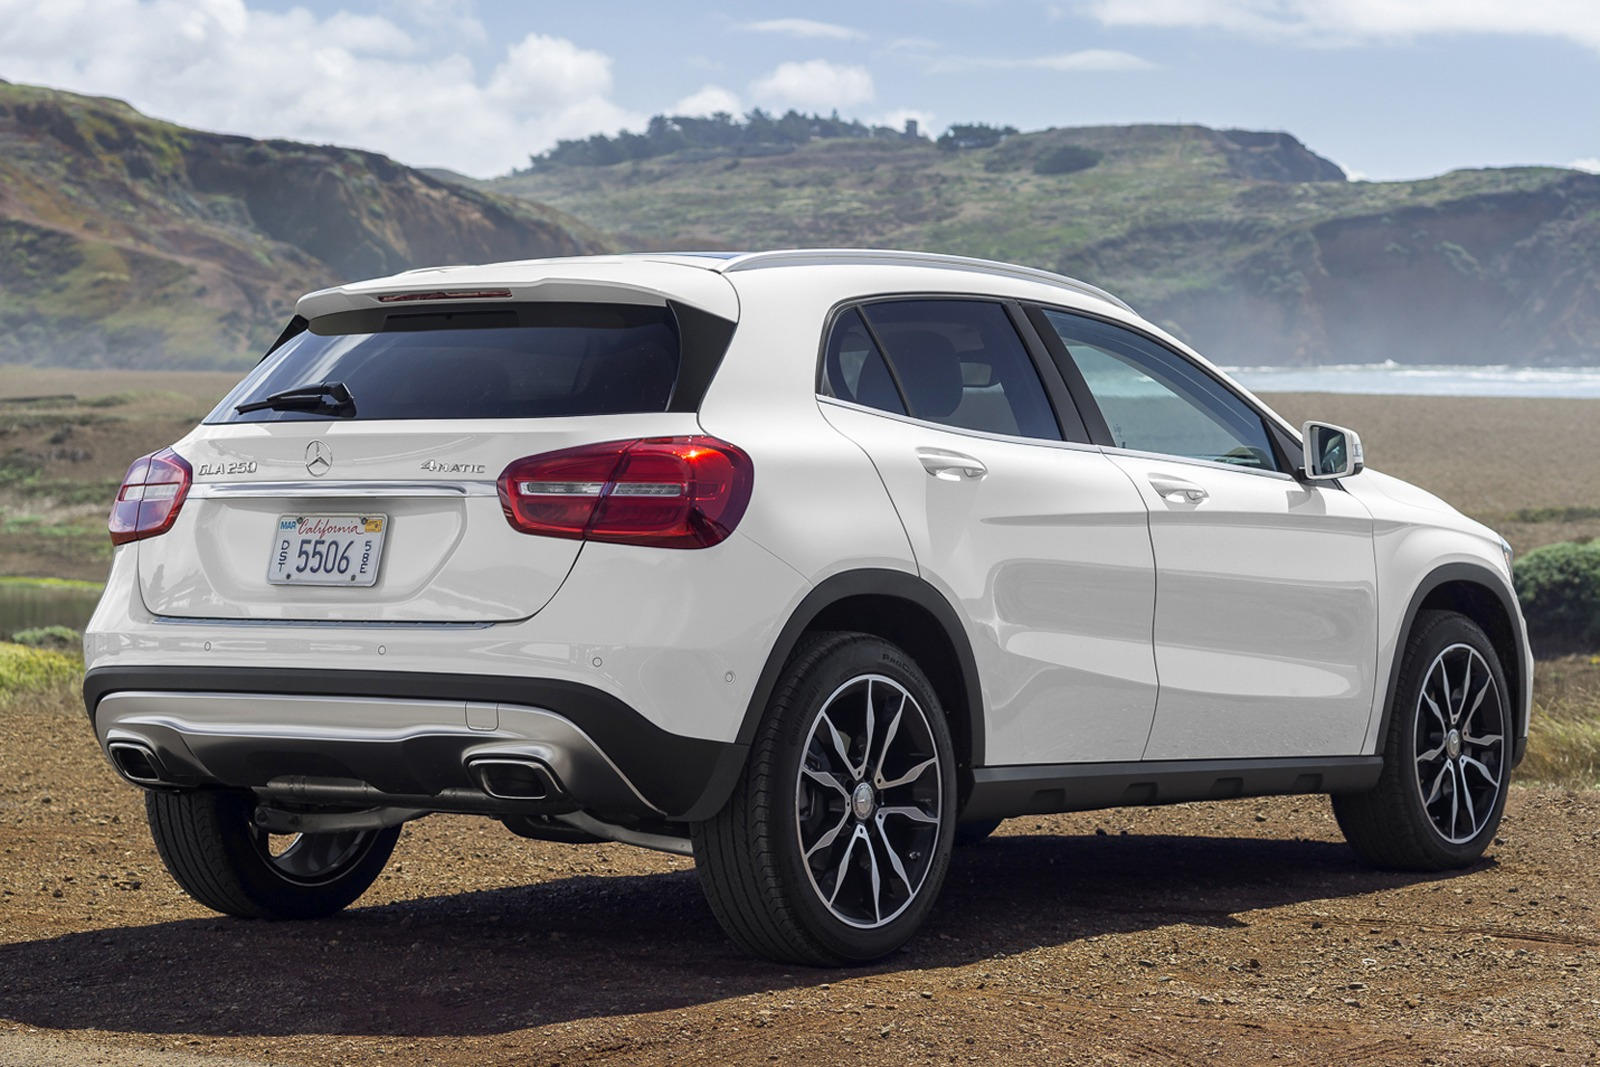 2016 Mercedes-Benz GLA-Class SUV: Review, Trims, Specs, Price, New